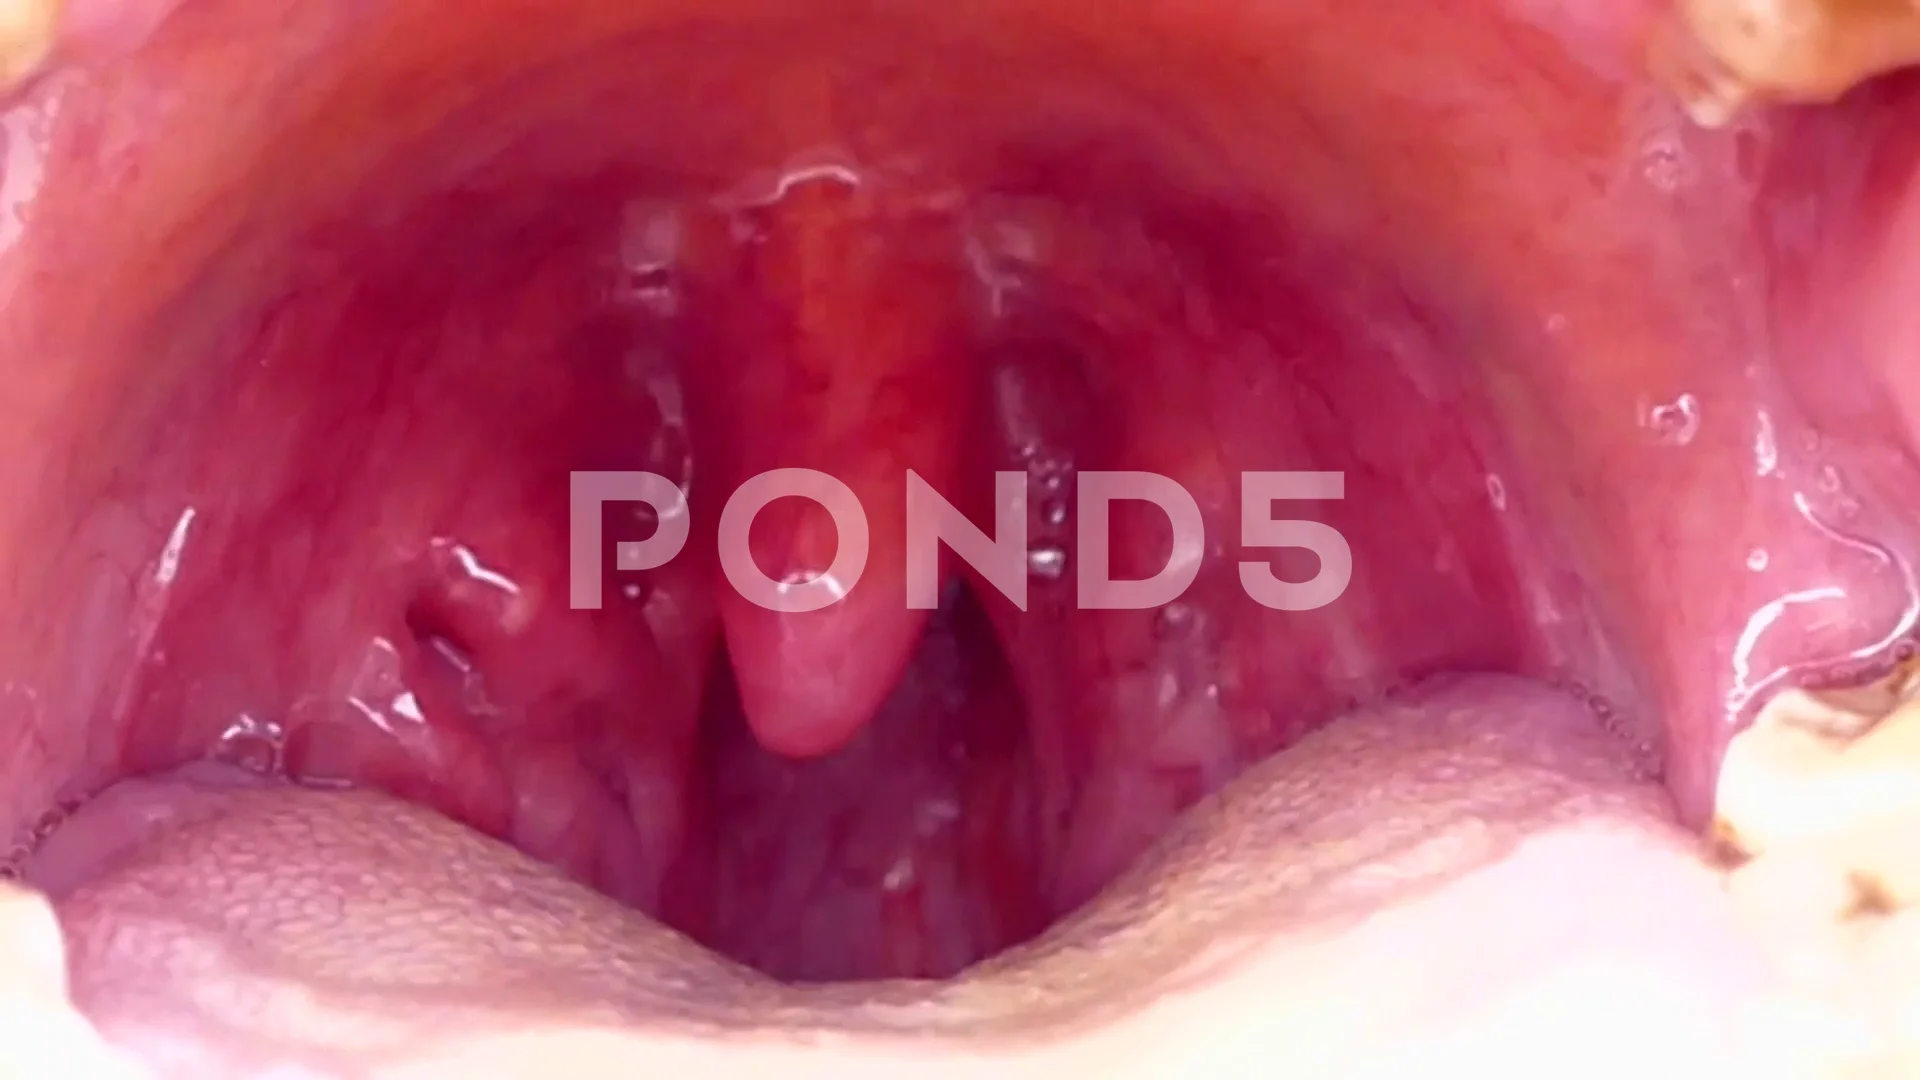 Tonsils Stock Footage ~ Royalty Free Stock Videos | Pond5